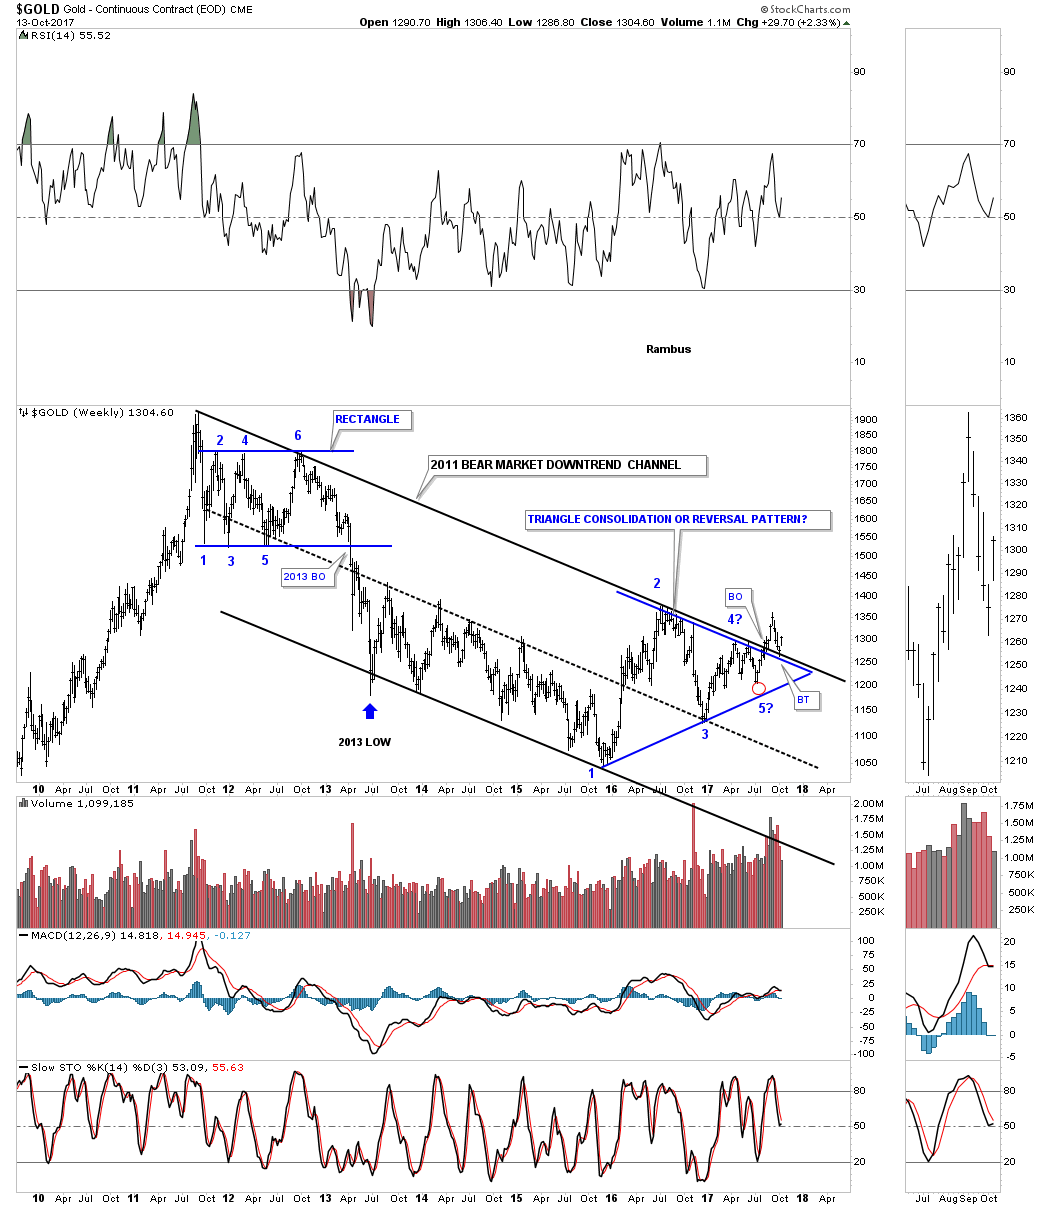 Gold Weekly 2010-2017